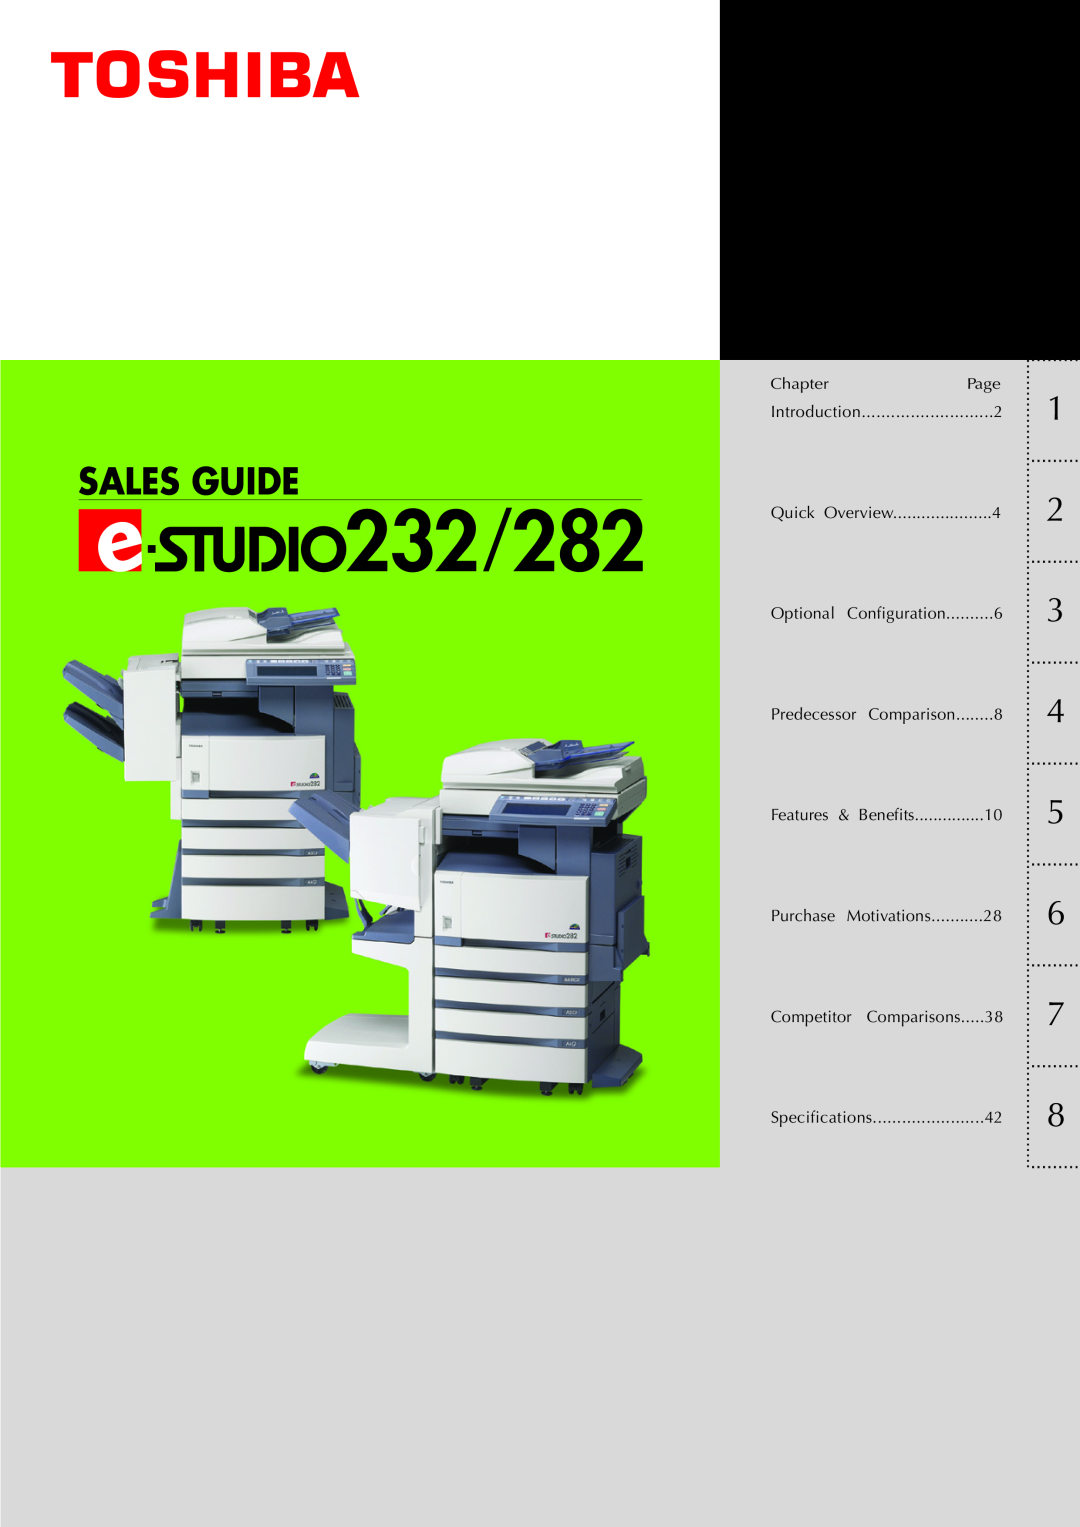 Toshiba 282 manual Sales Guide, Introduction, Quick Overview, Optional Configuration, Features & Benefits, Specifications 